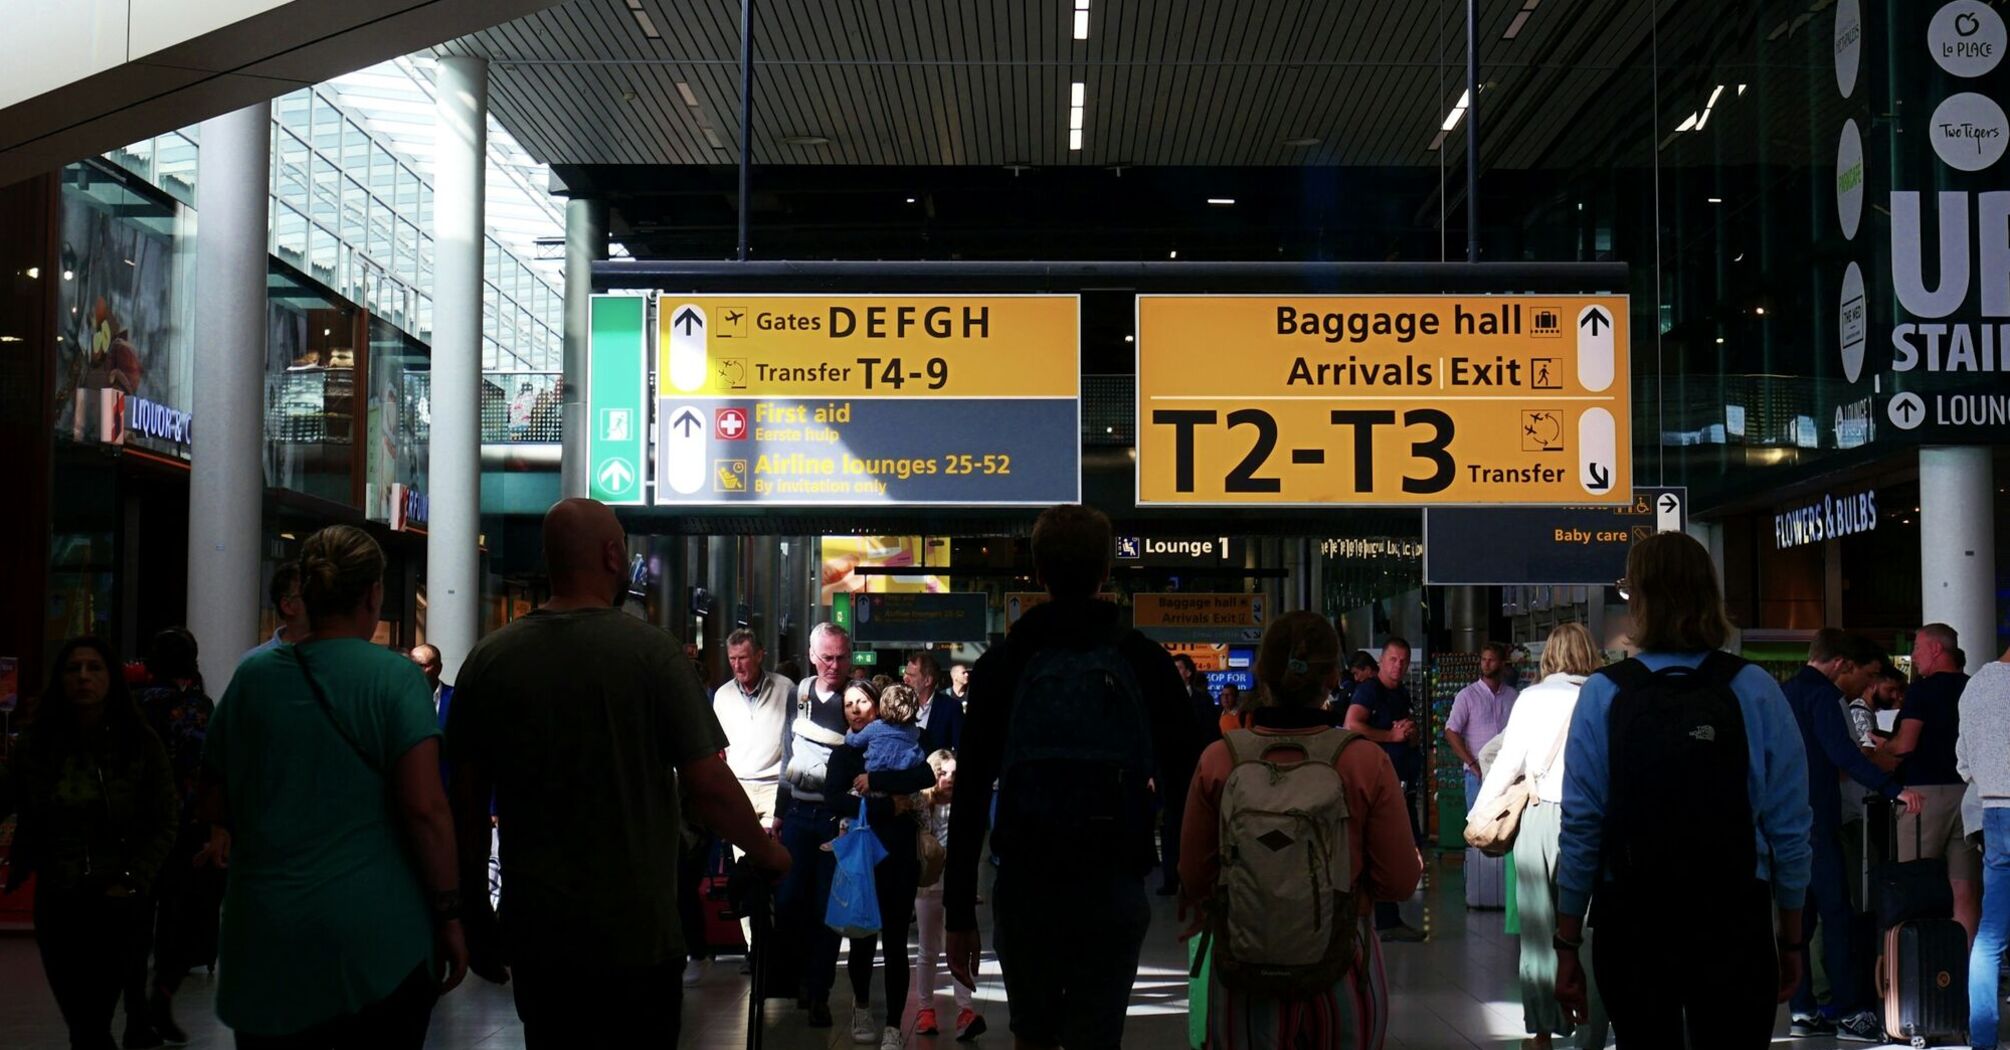 Crowded airport terminal with passengers and direction signs